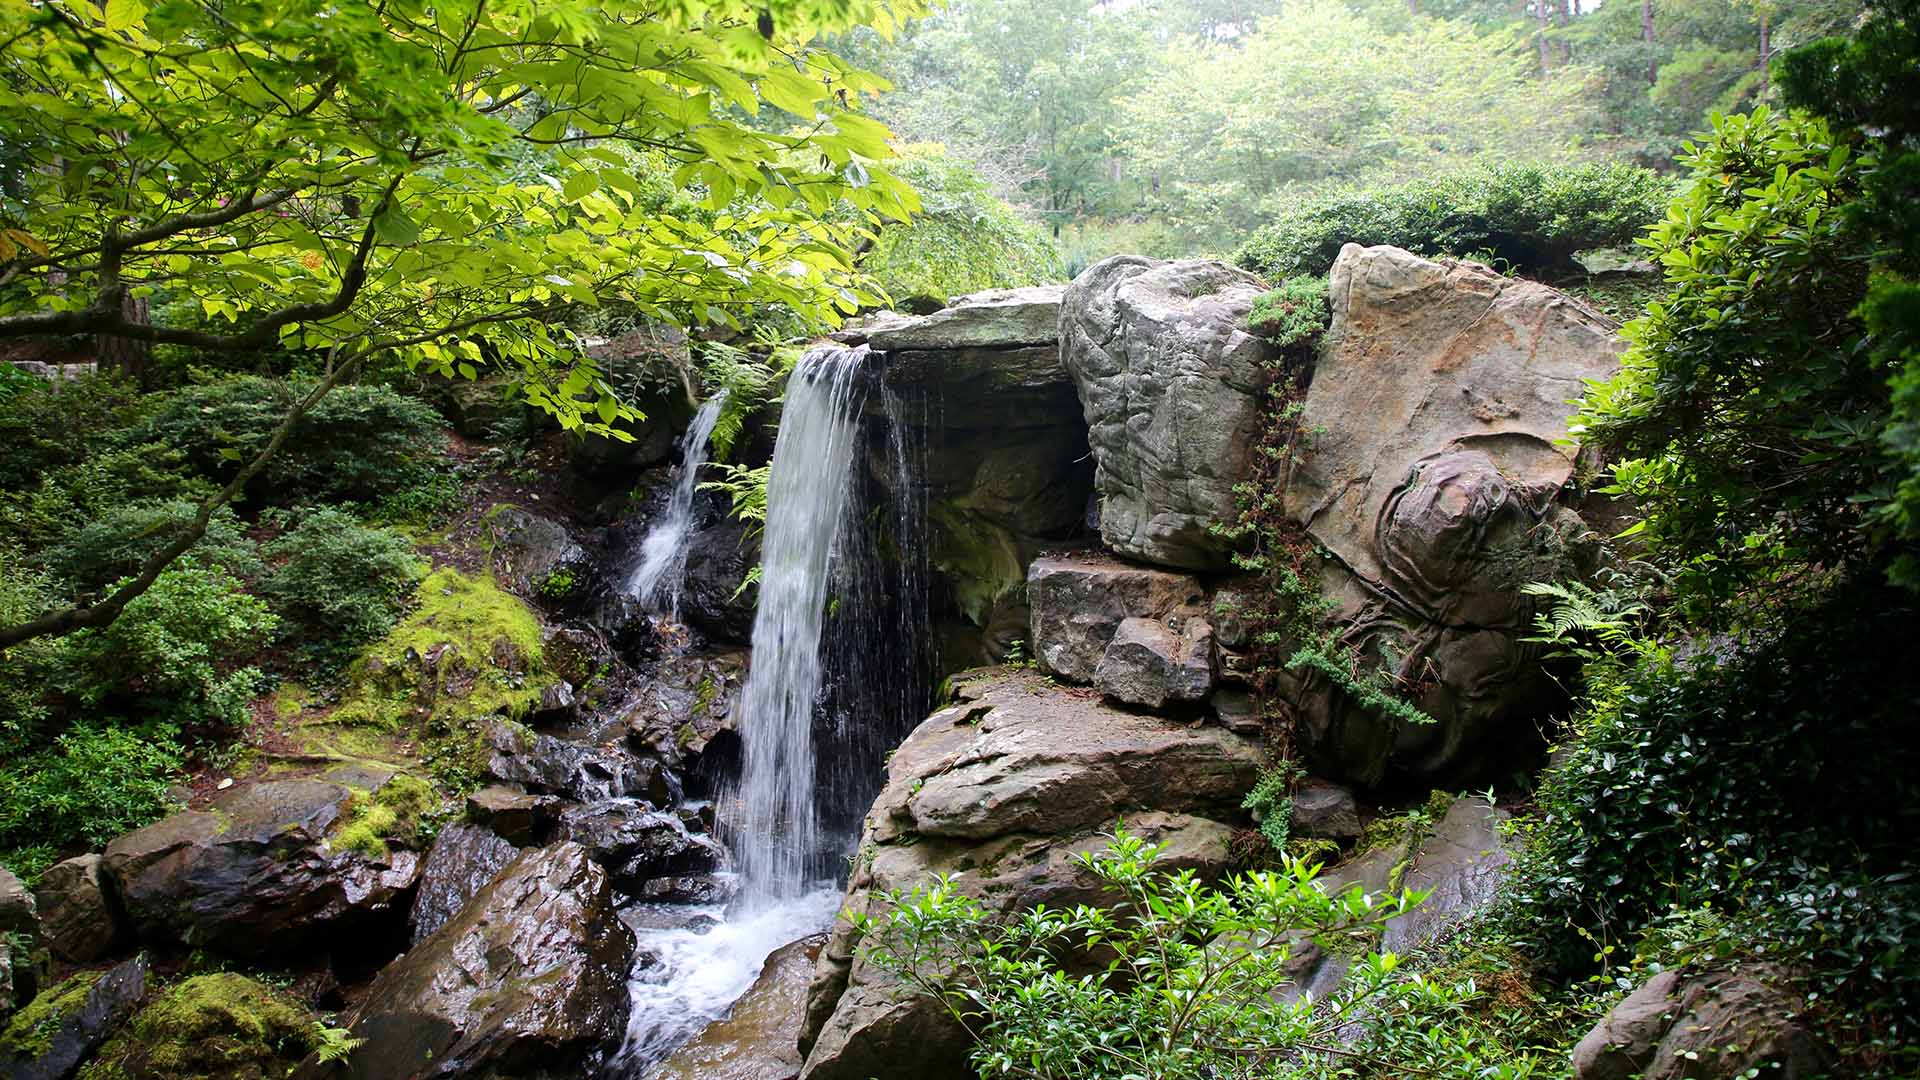 The Garvan Woodland Gardens is located in the picturesque Ouachita Mountains.